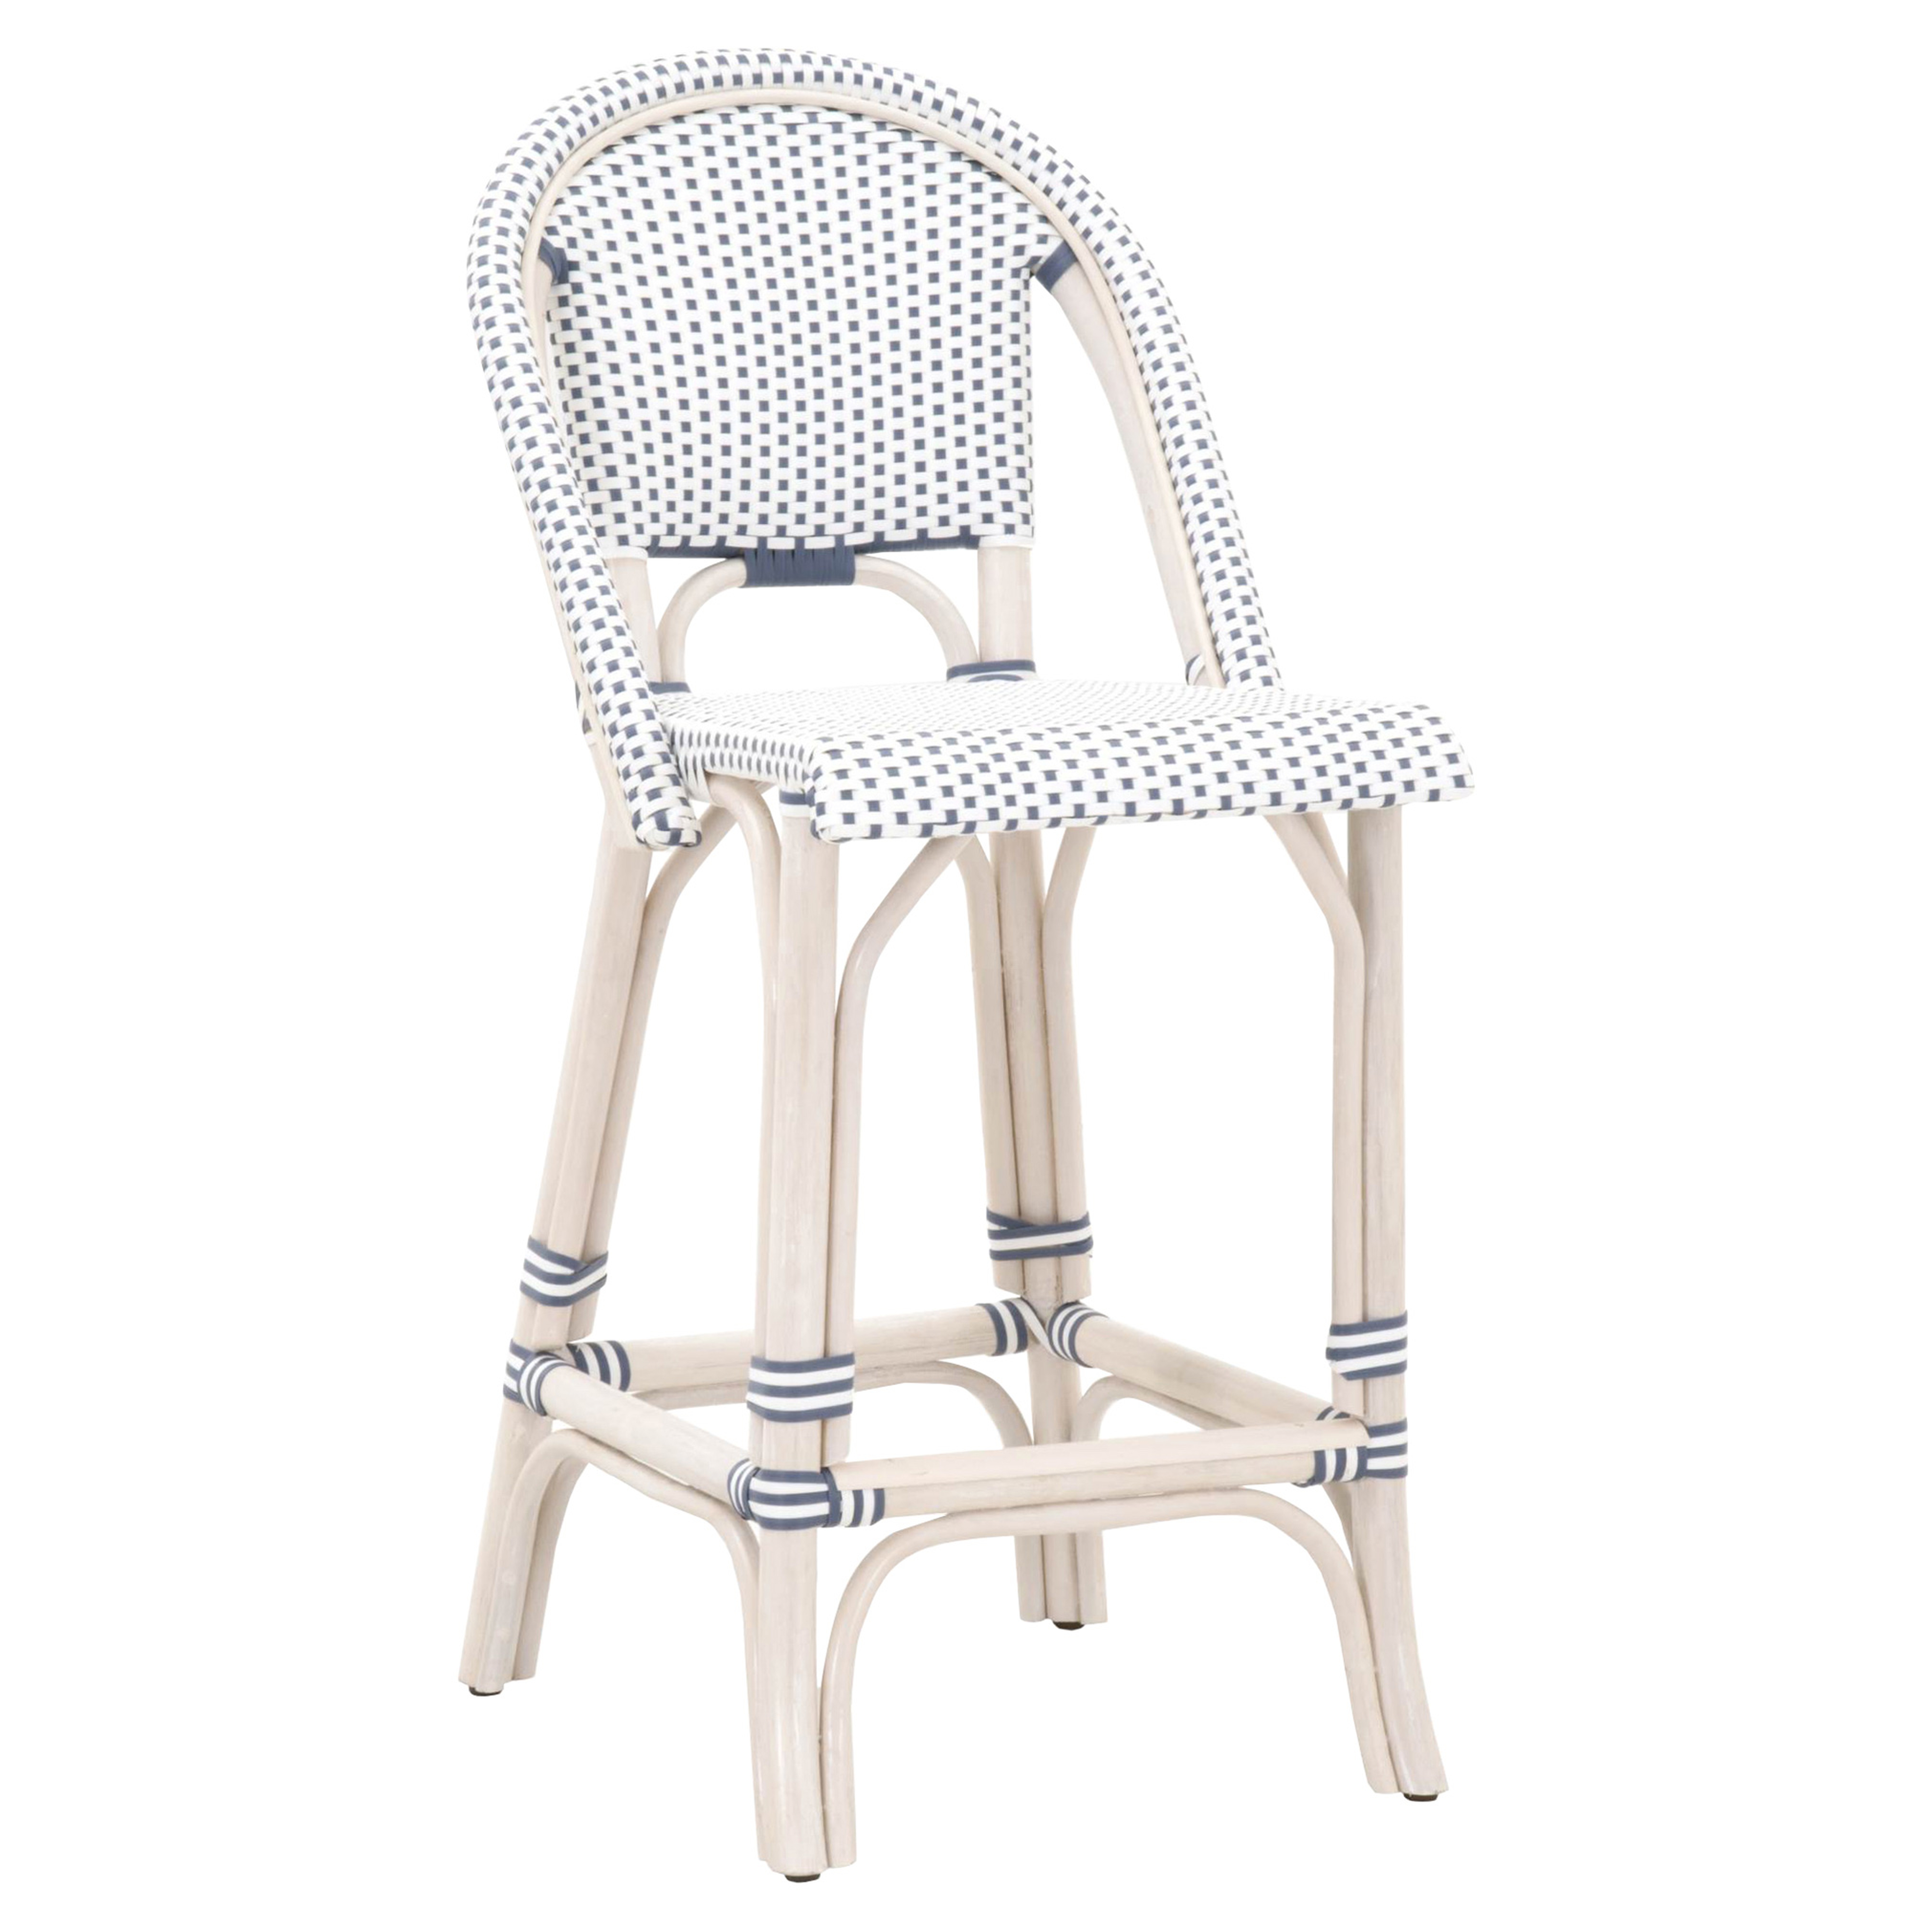 Peter Global Bazaar Woven White Wash Rattan Outdoor Counter Stool - Set of 2 - Kathy Kuo Home